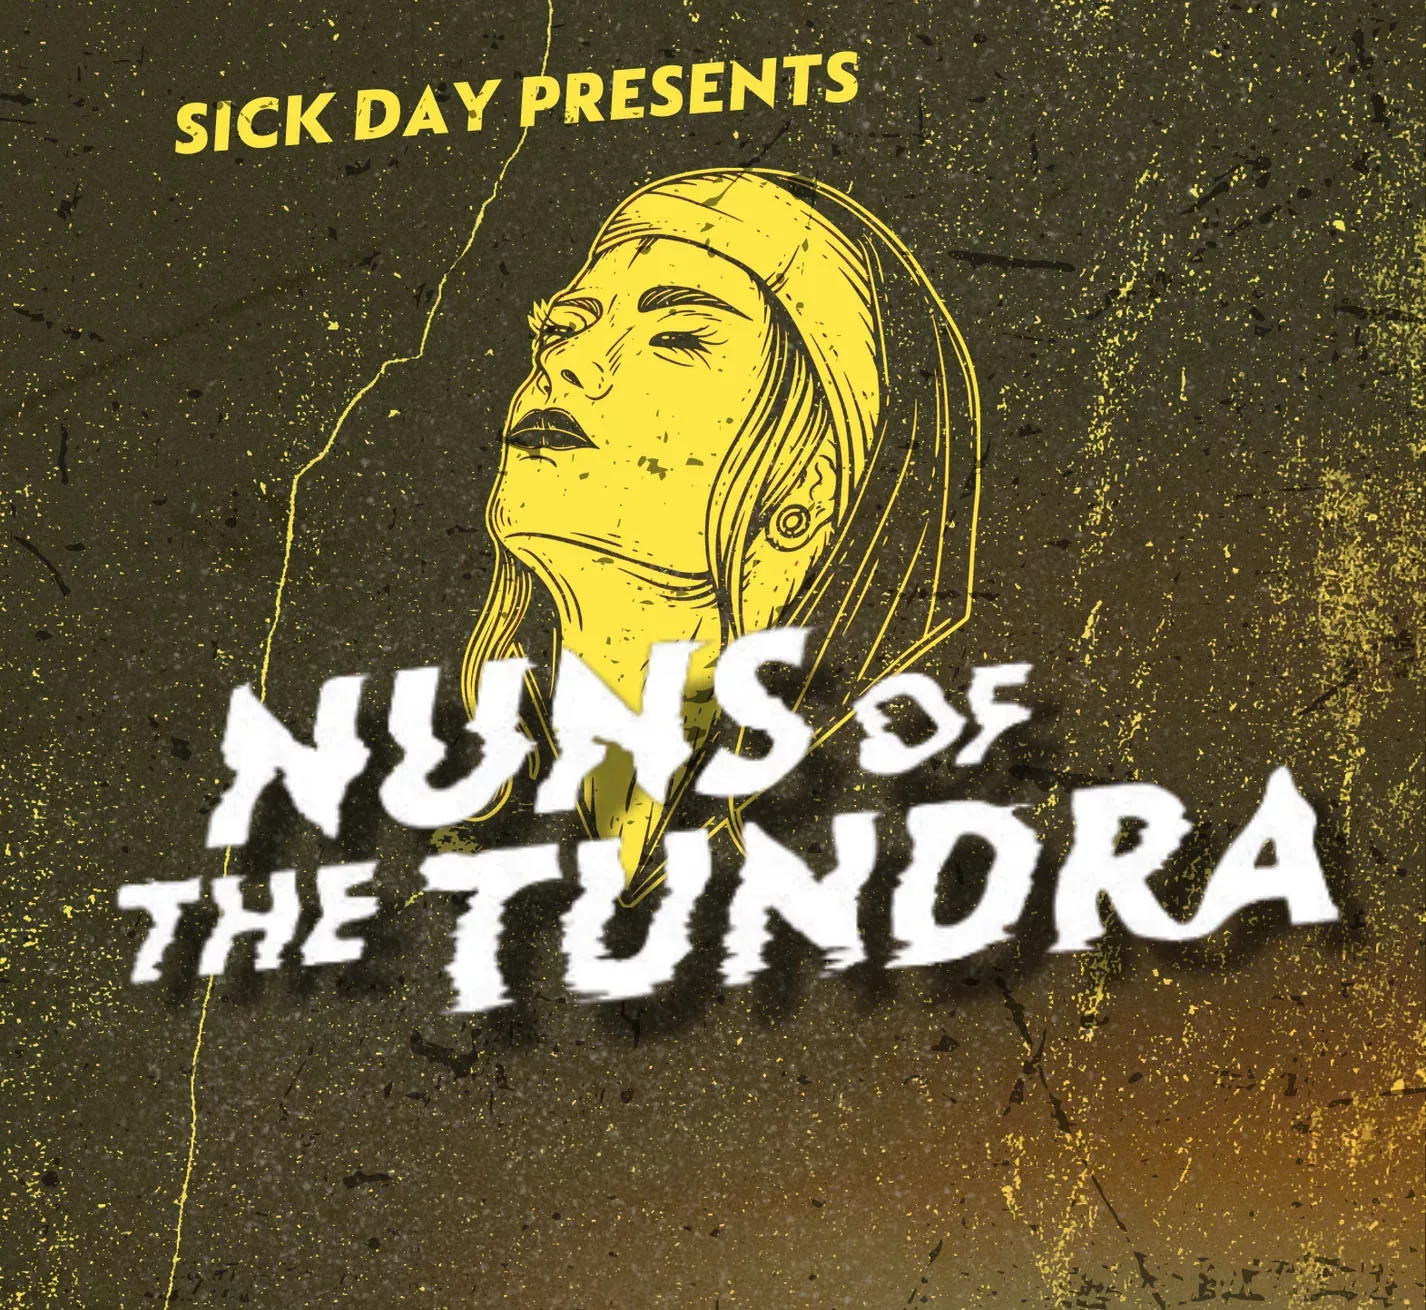 Nuns of the Tundra. Malvern Rocks Gig Guide for Music in Malvern. Gigs, concerts, live music, open mic nights. Make Malvern your destination for music.